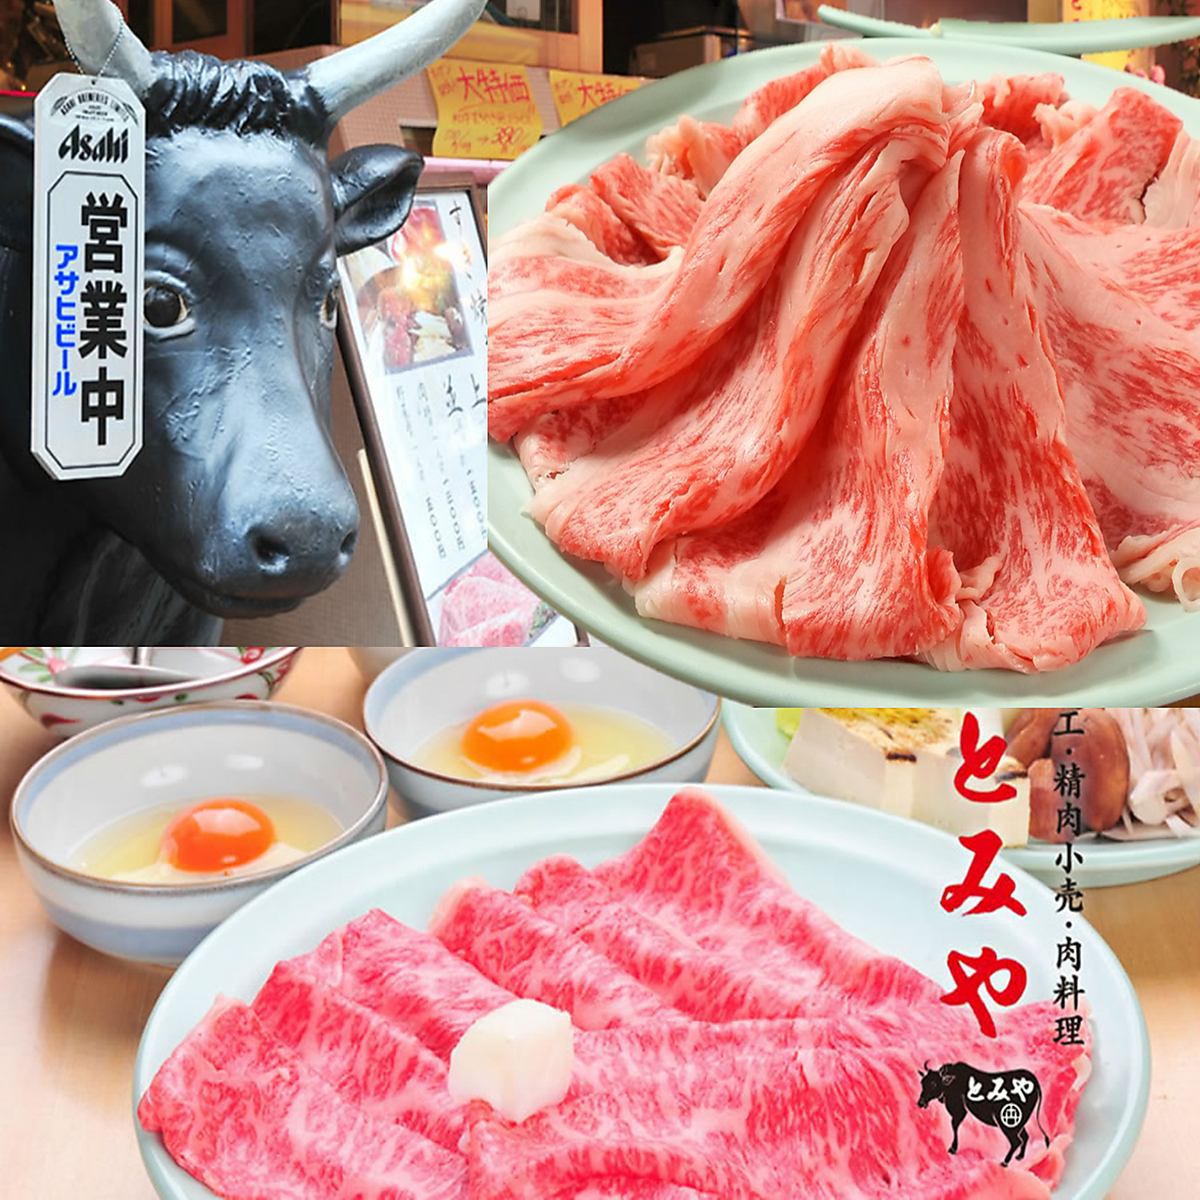 Enjoy Yakiniku on the 1st floor and sukiyaki on the 2nd floor! You can enjoy cheap and delicious meat because it is a meat point ★